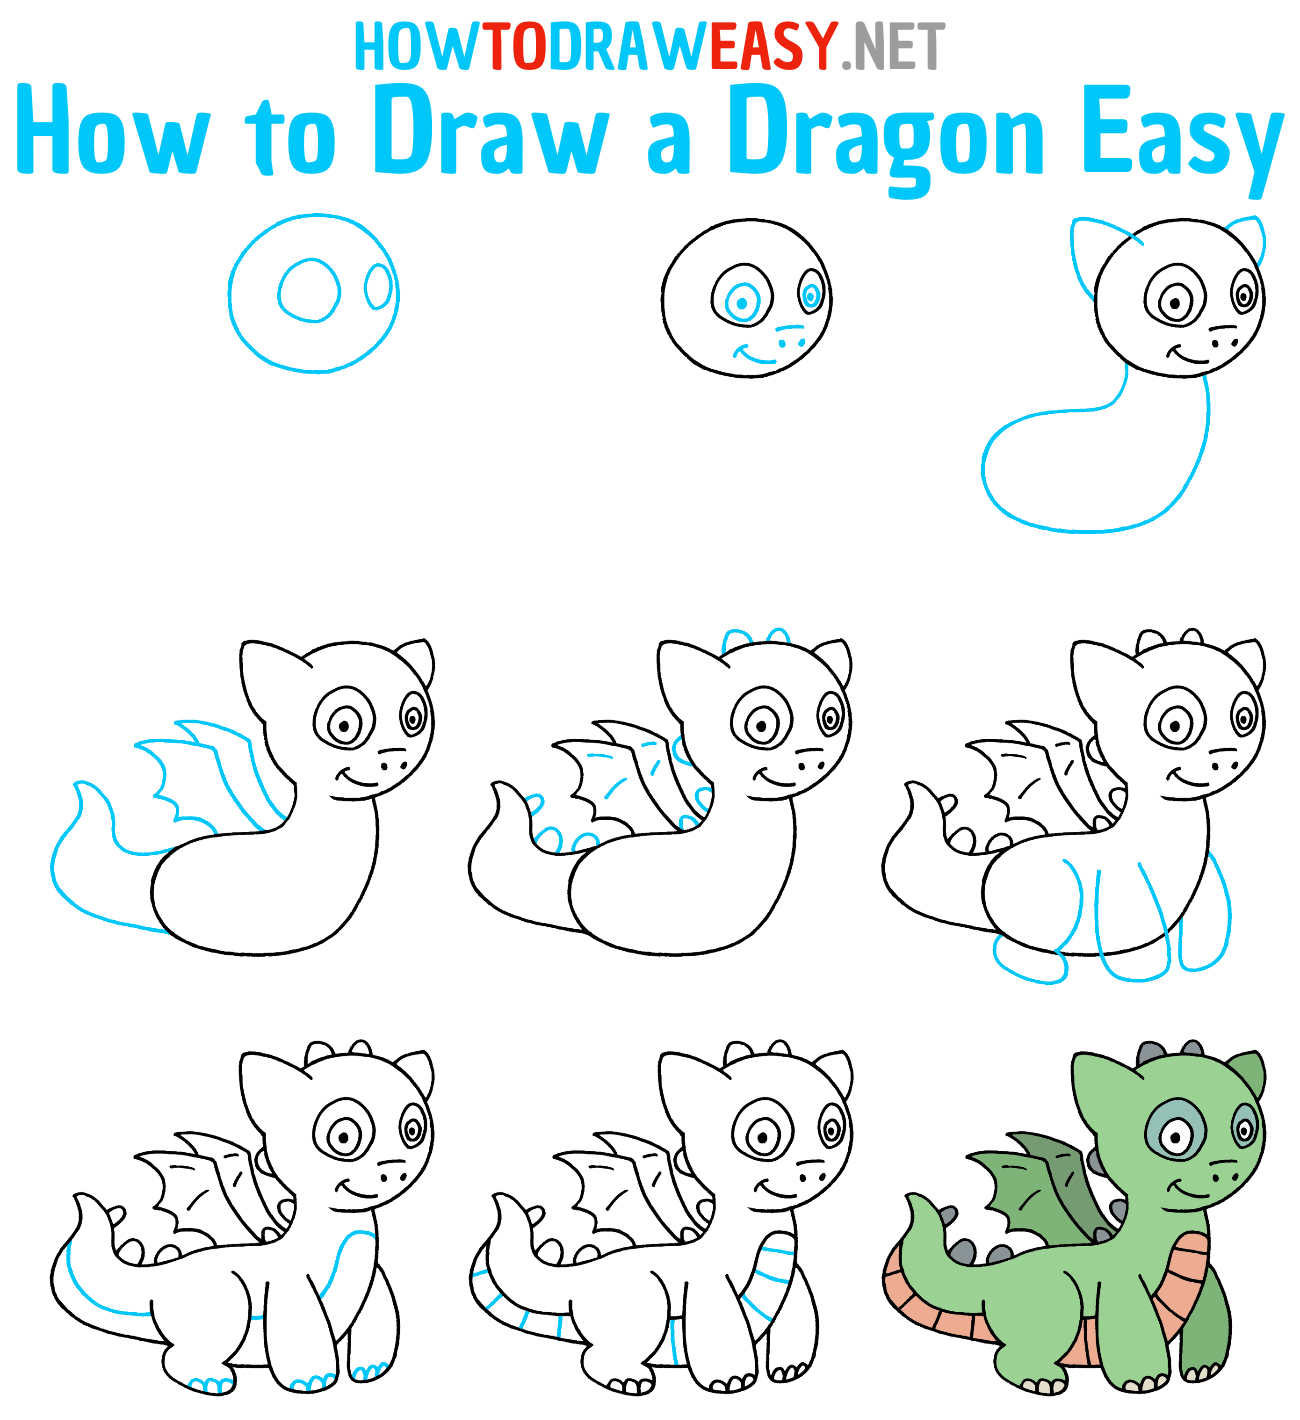 How to Draw a Dragon Easy Step by Step